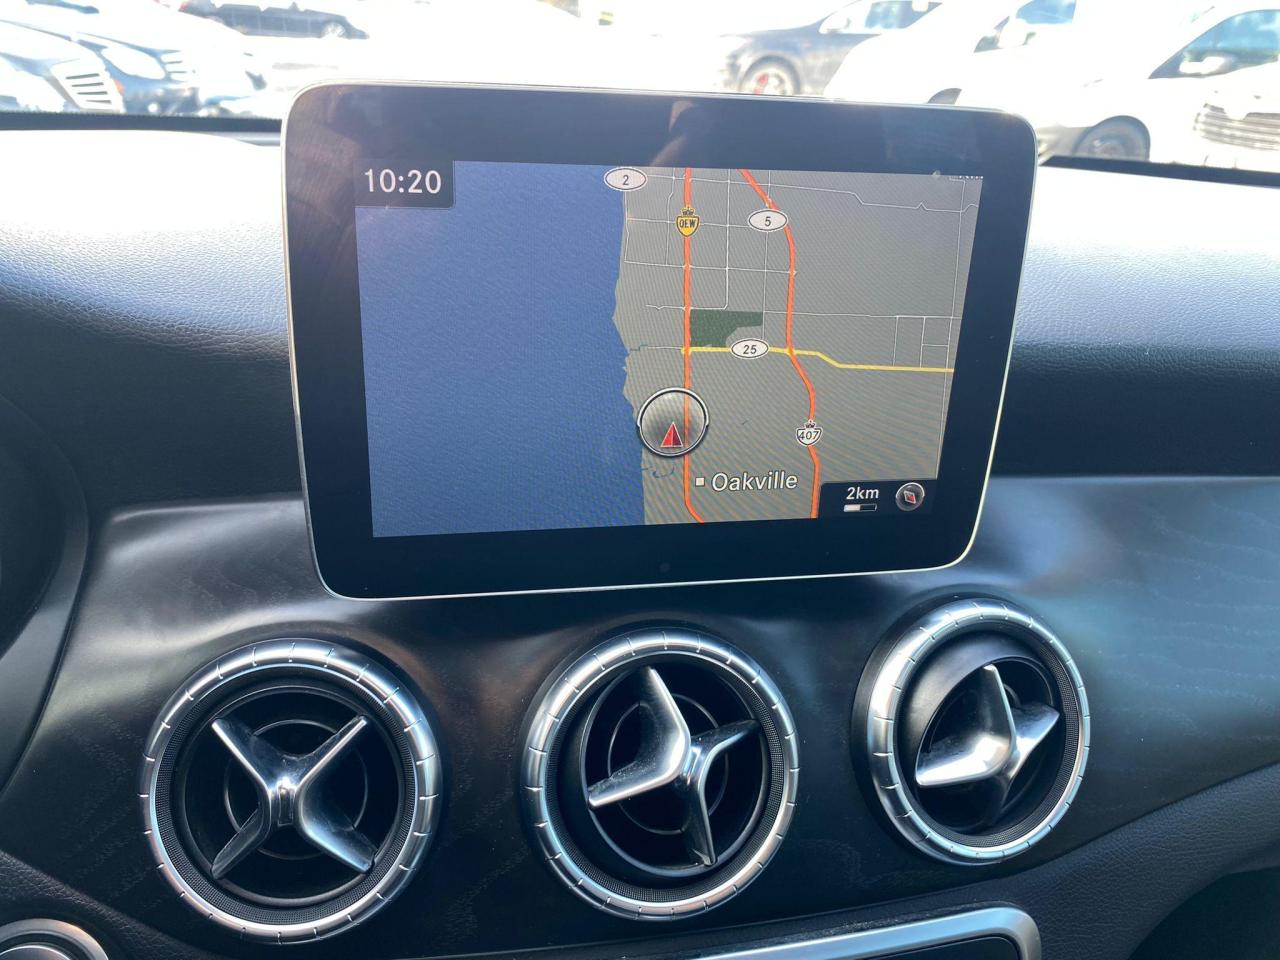 2018 Mercedes-Benz CLA-Class LOW KM 4MATIC AWD NAVIGATION CAMERA PANORAMIC ROOF - Photo #24